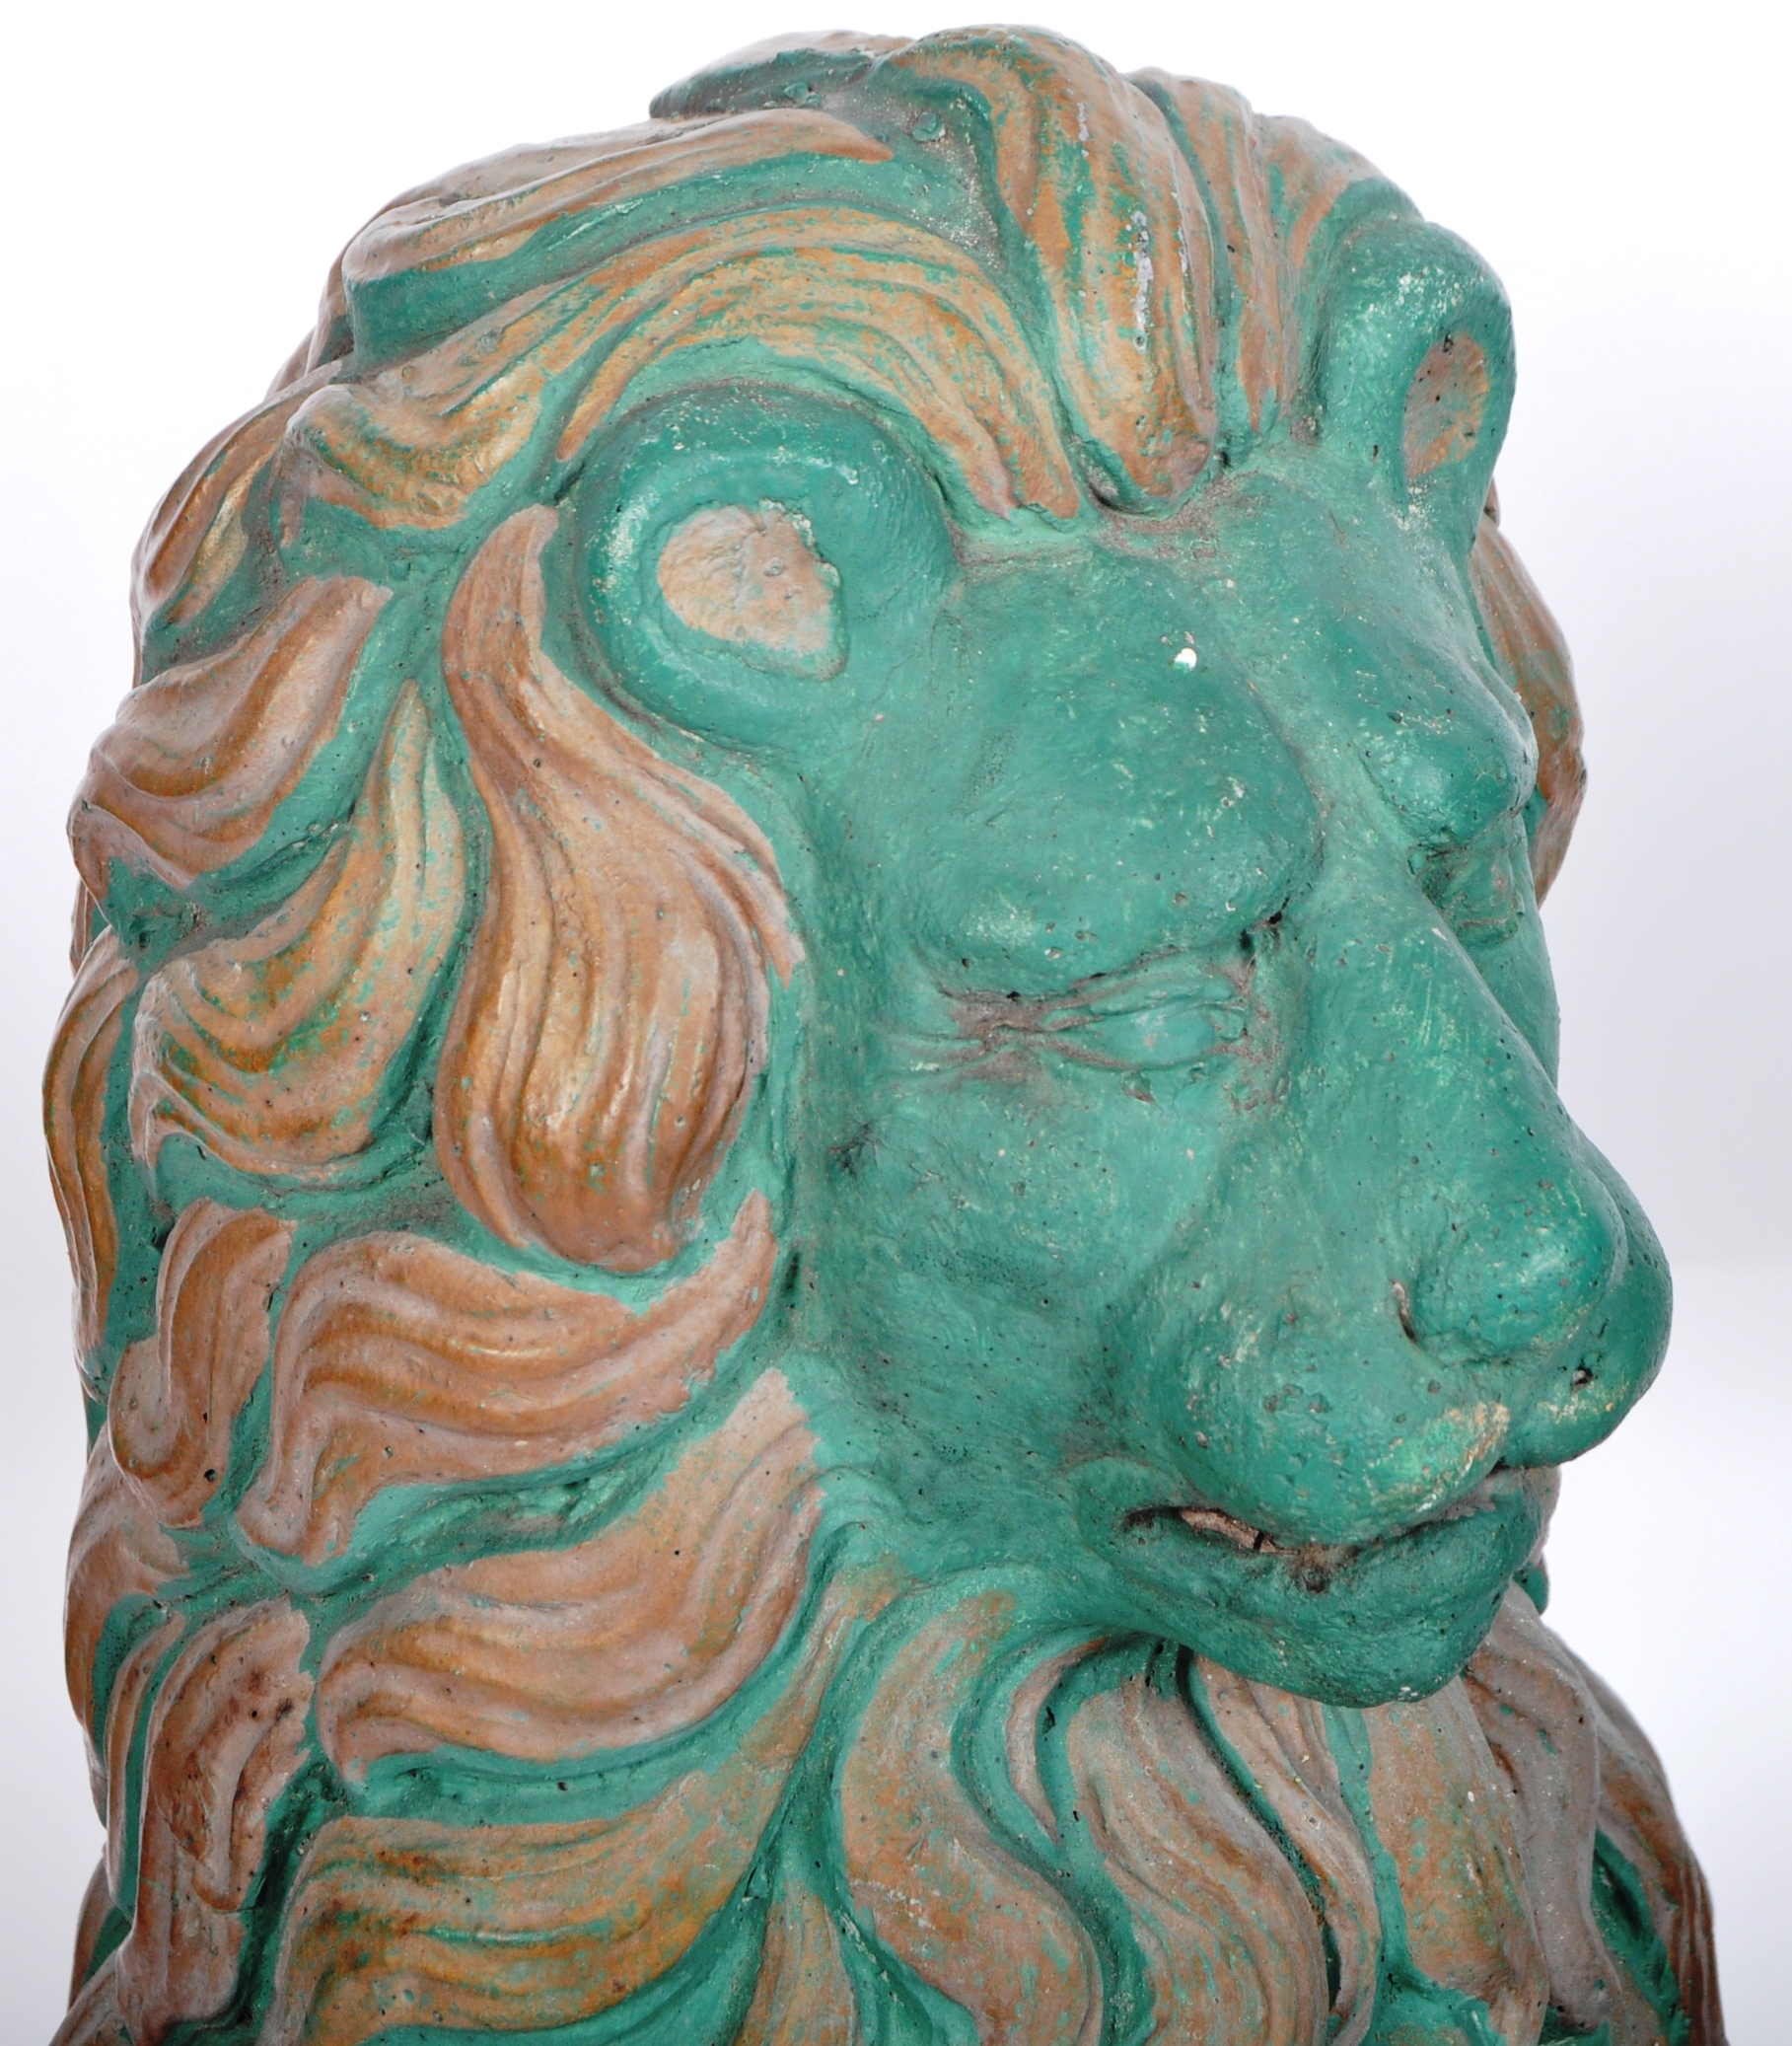 MATCHING PAIR OF PAINTED RECONSTITUTED STONE LION FIGURES - Image 4 of 12